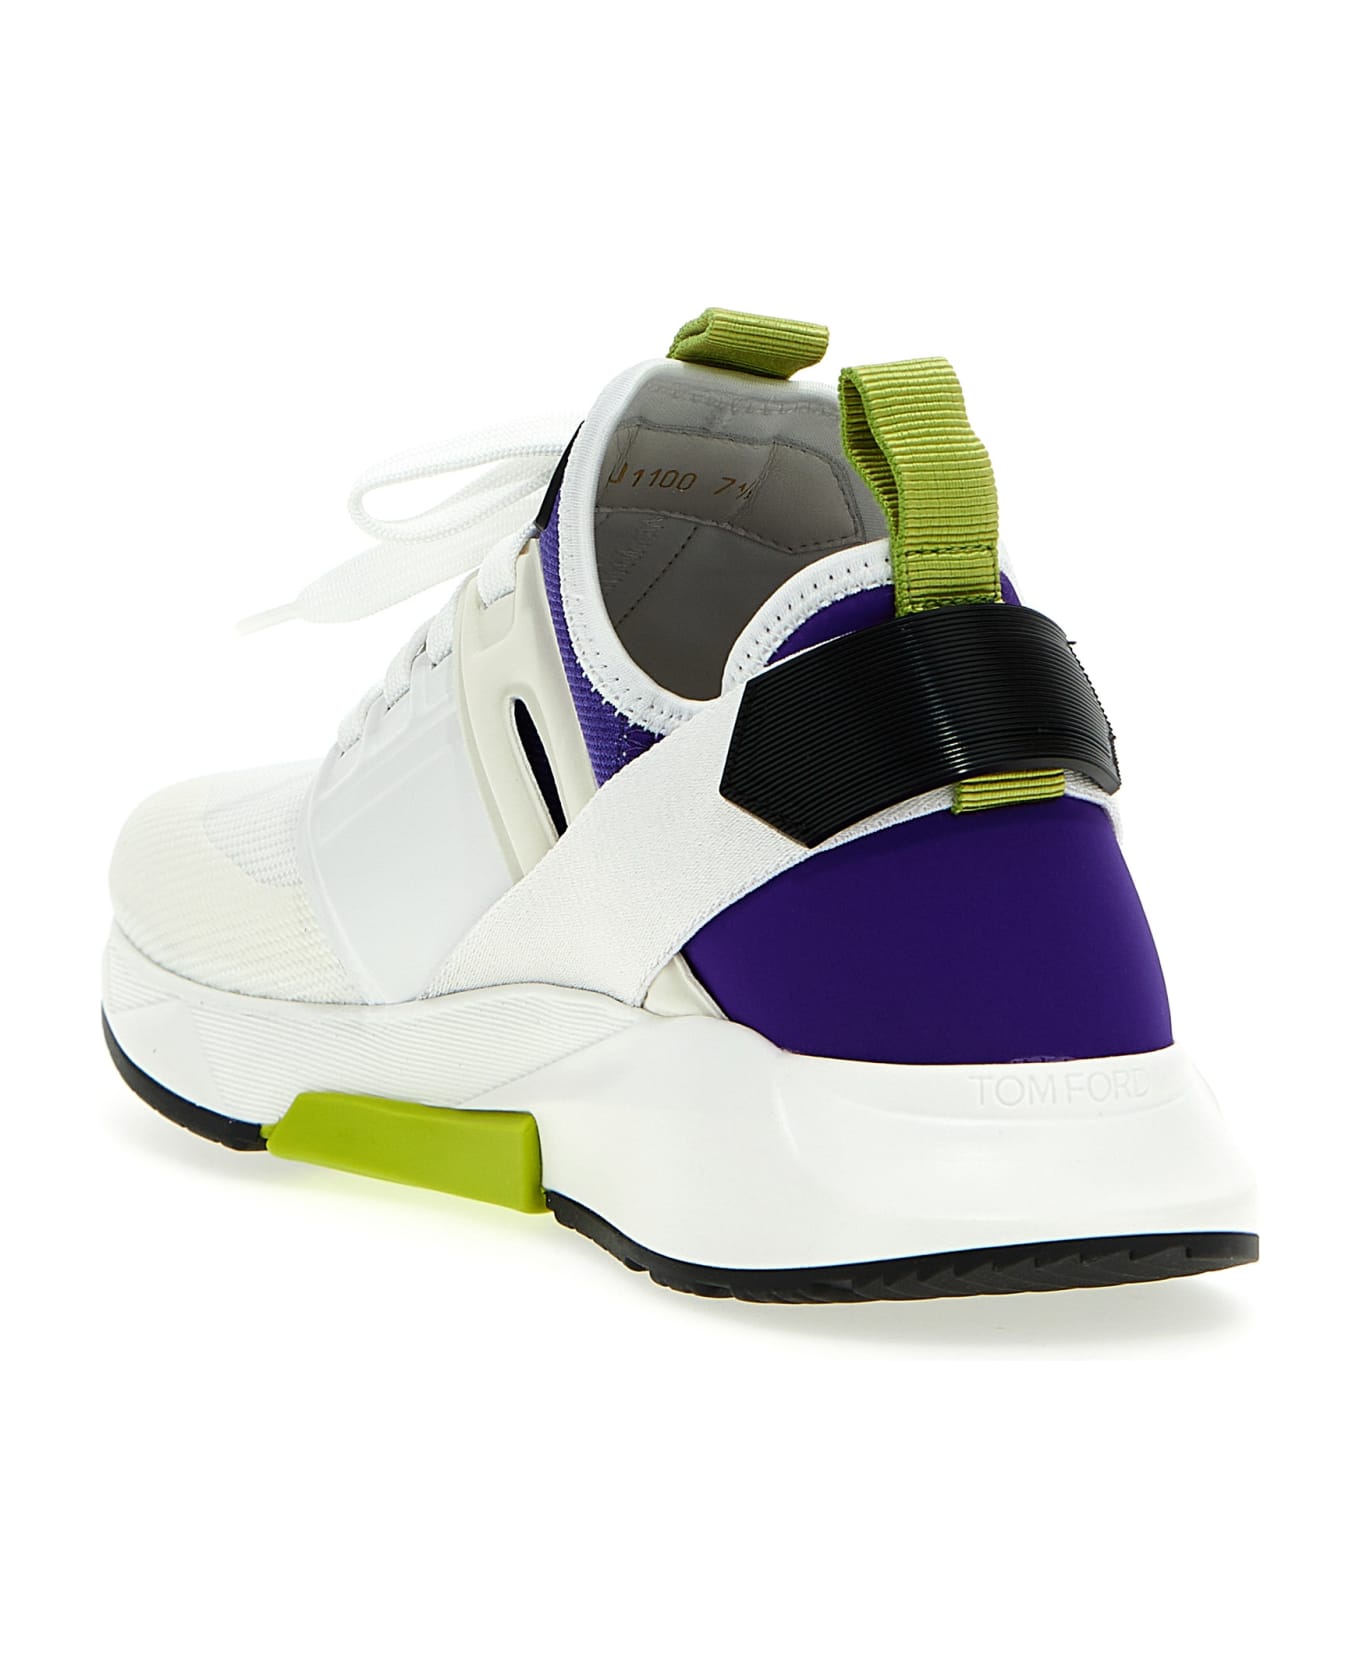 Tom Ford Low Sneakers - White スニーカー